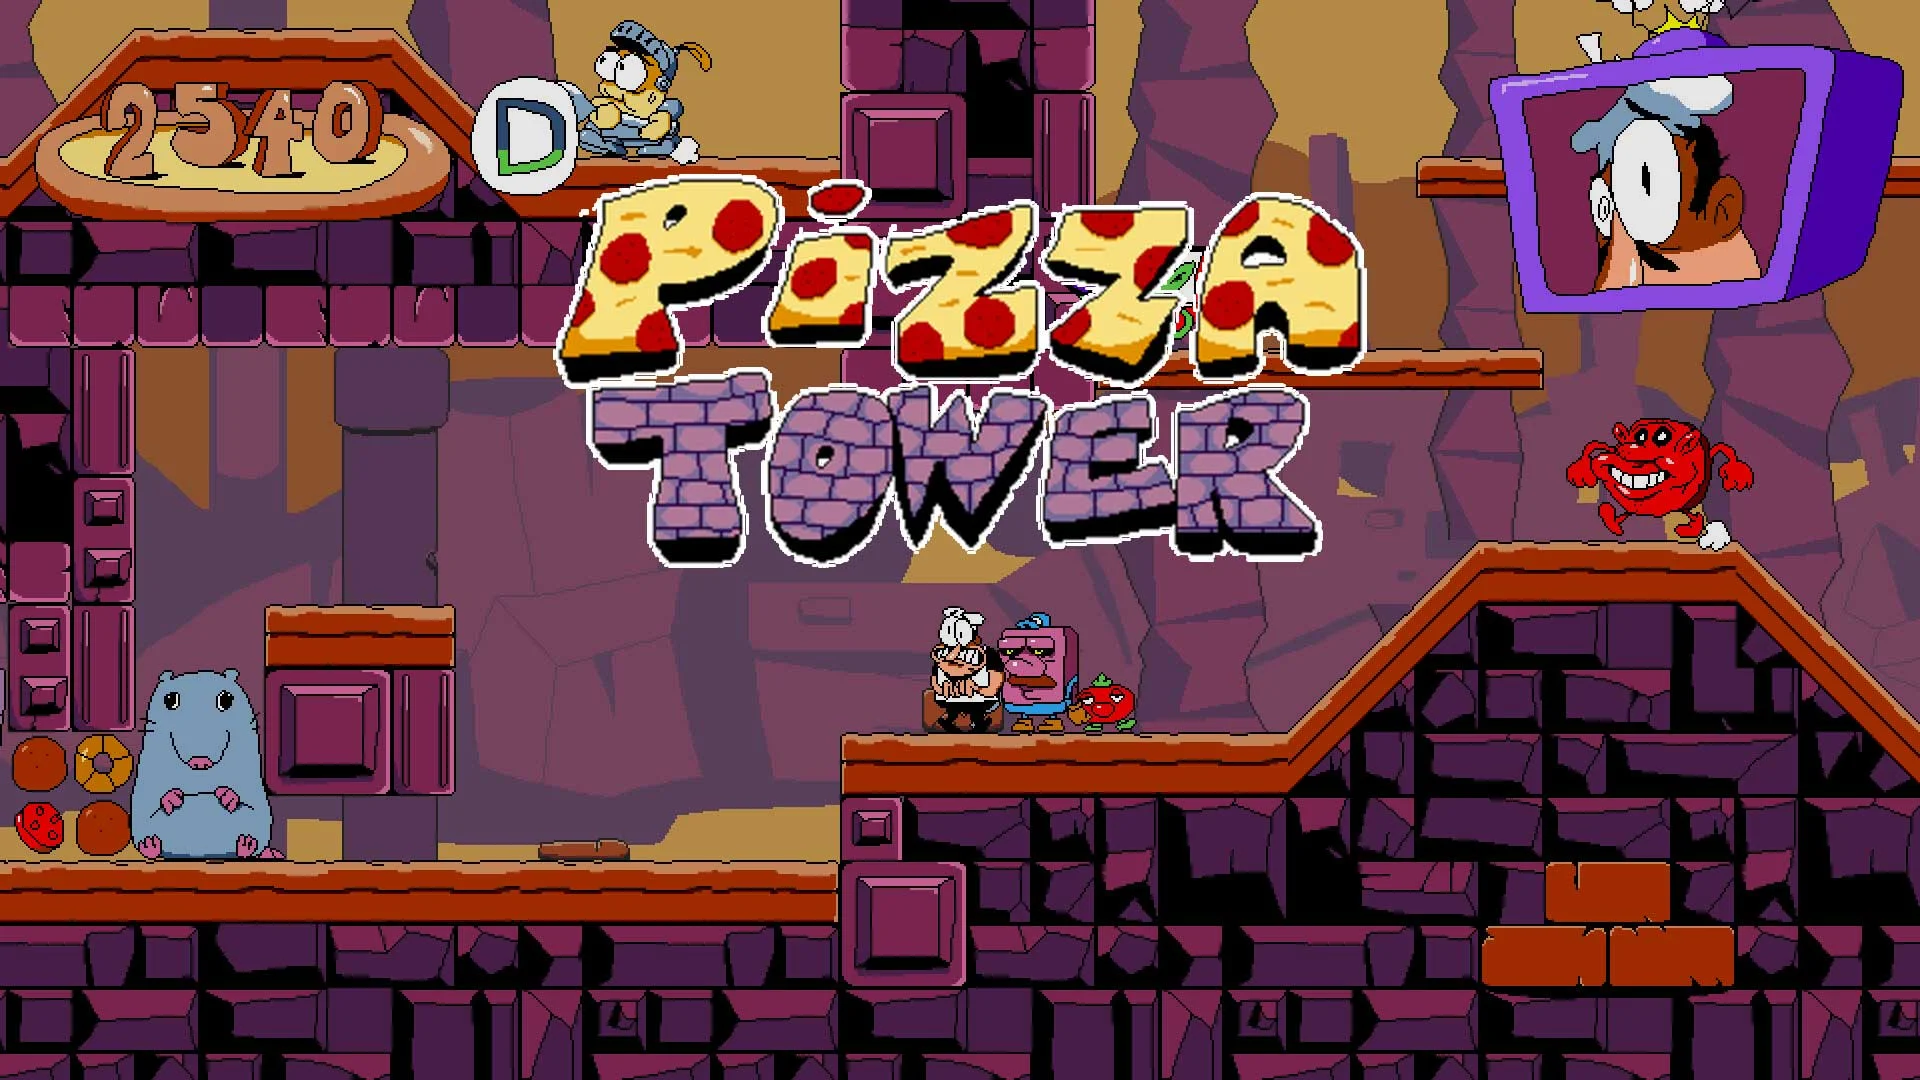 Download Pizza Tower Game APK v1 For Android